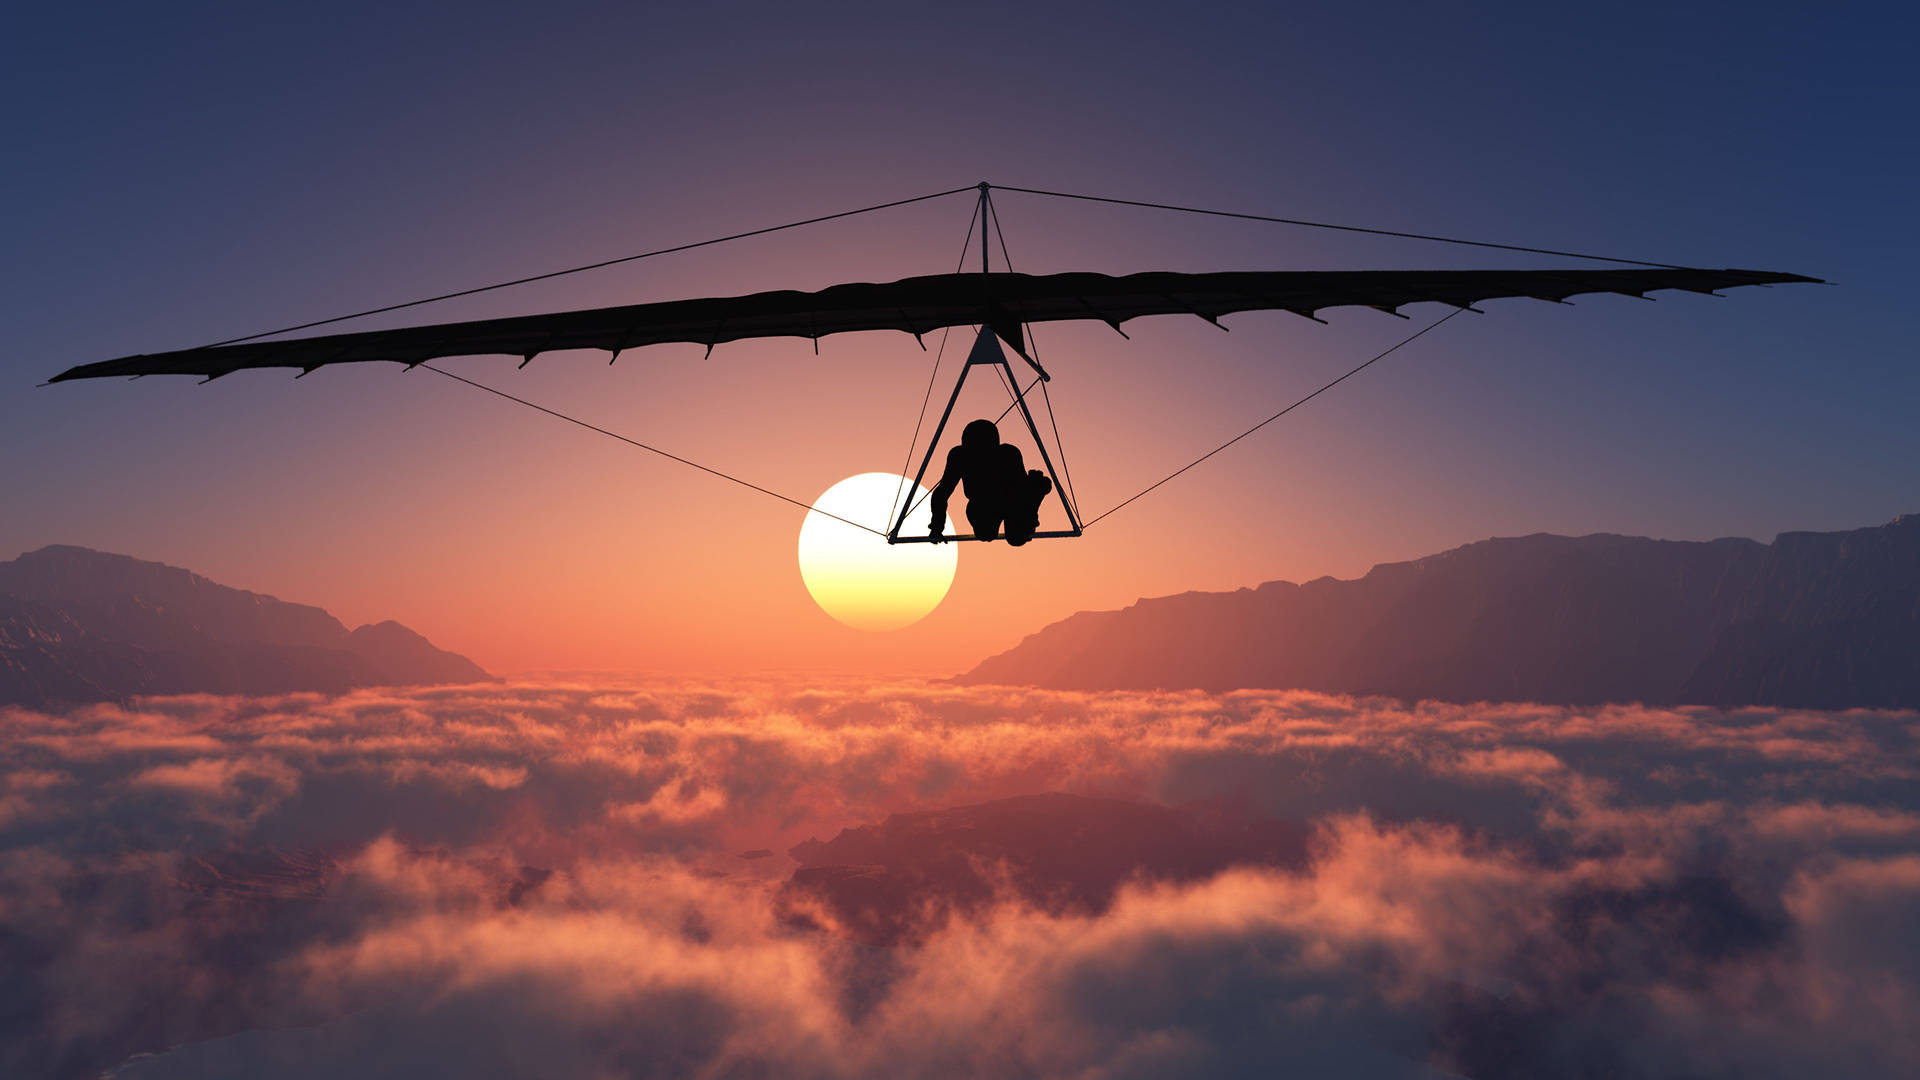 Hang Gliding Over Clouds Sunset Wallpaper